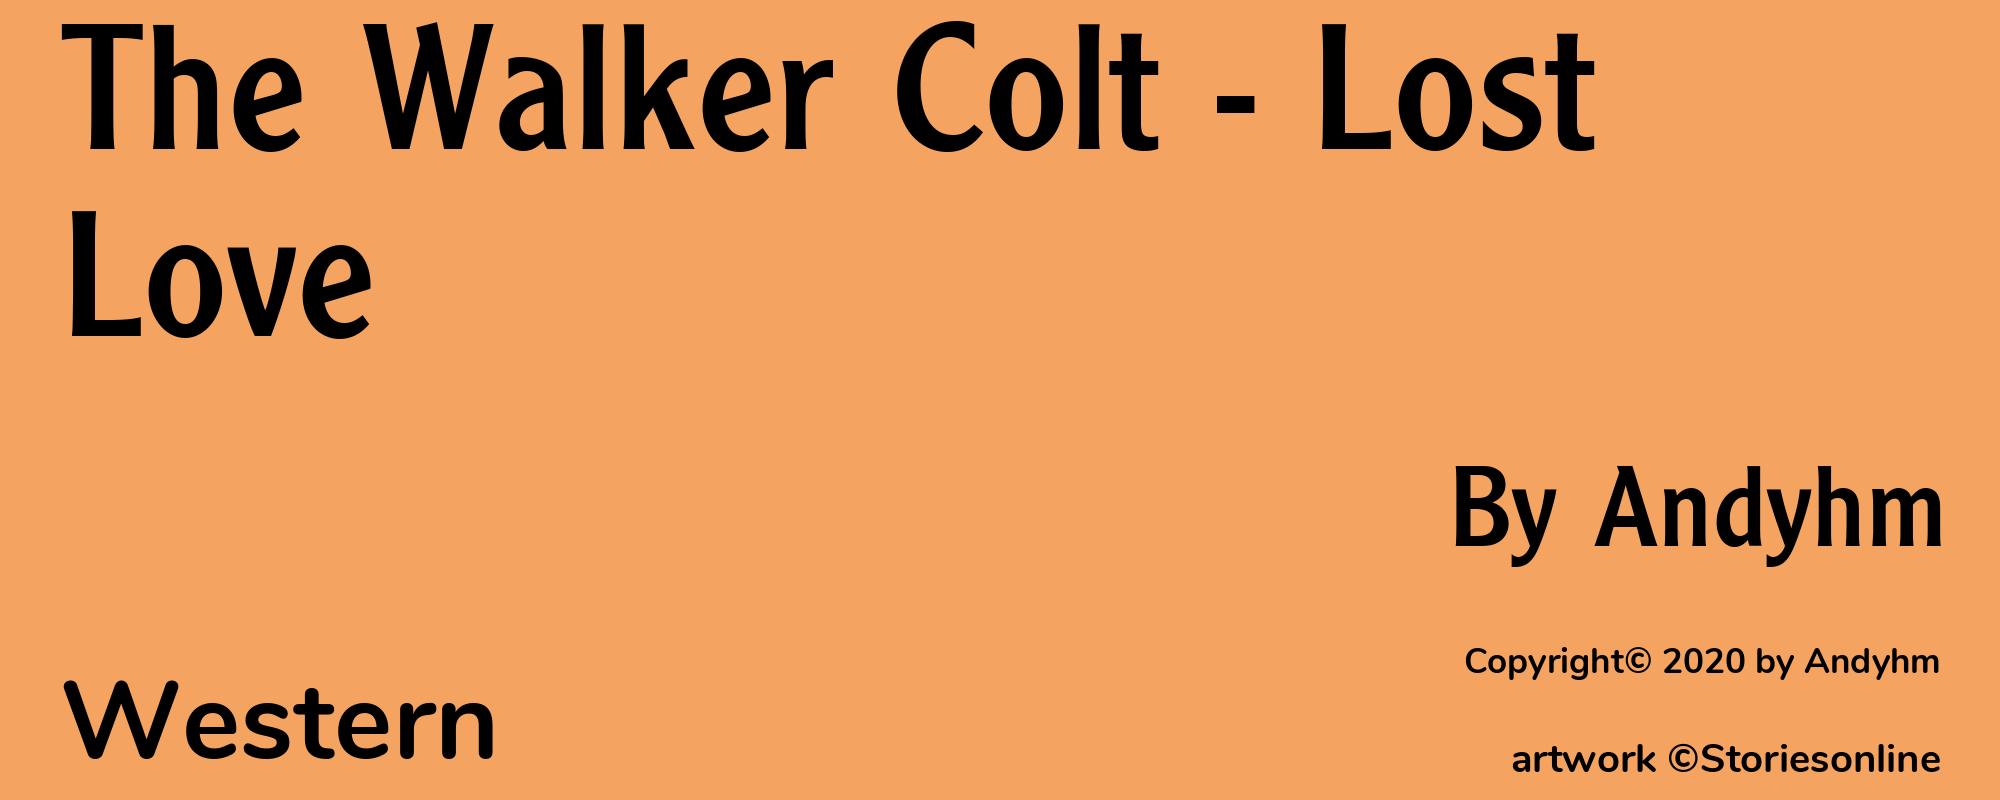 The Walker Colt - Lost Love - Cover